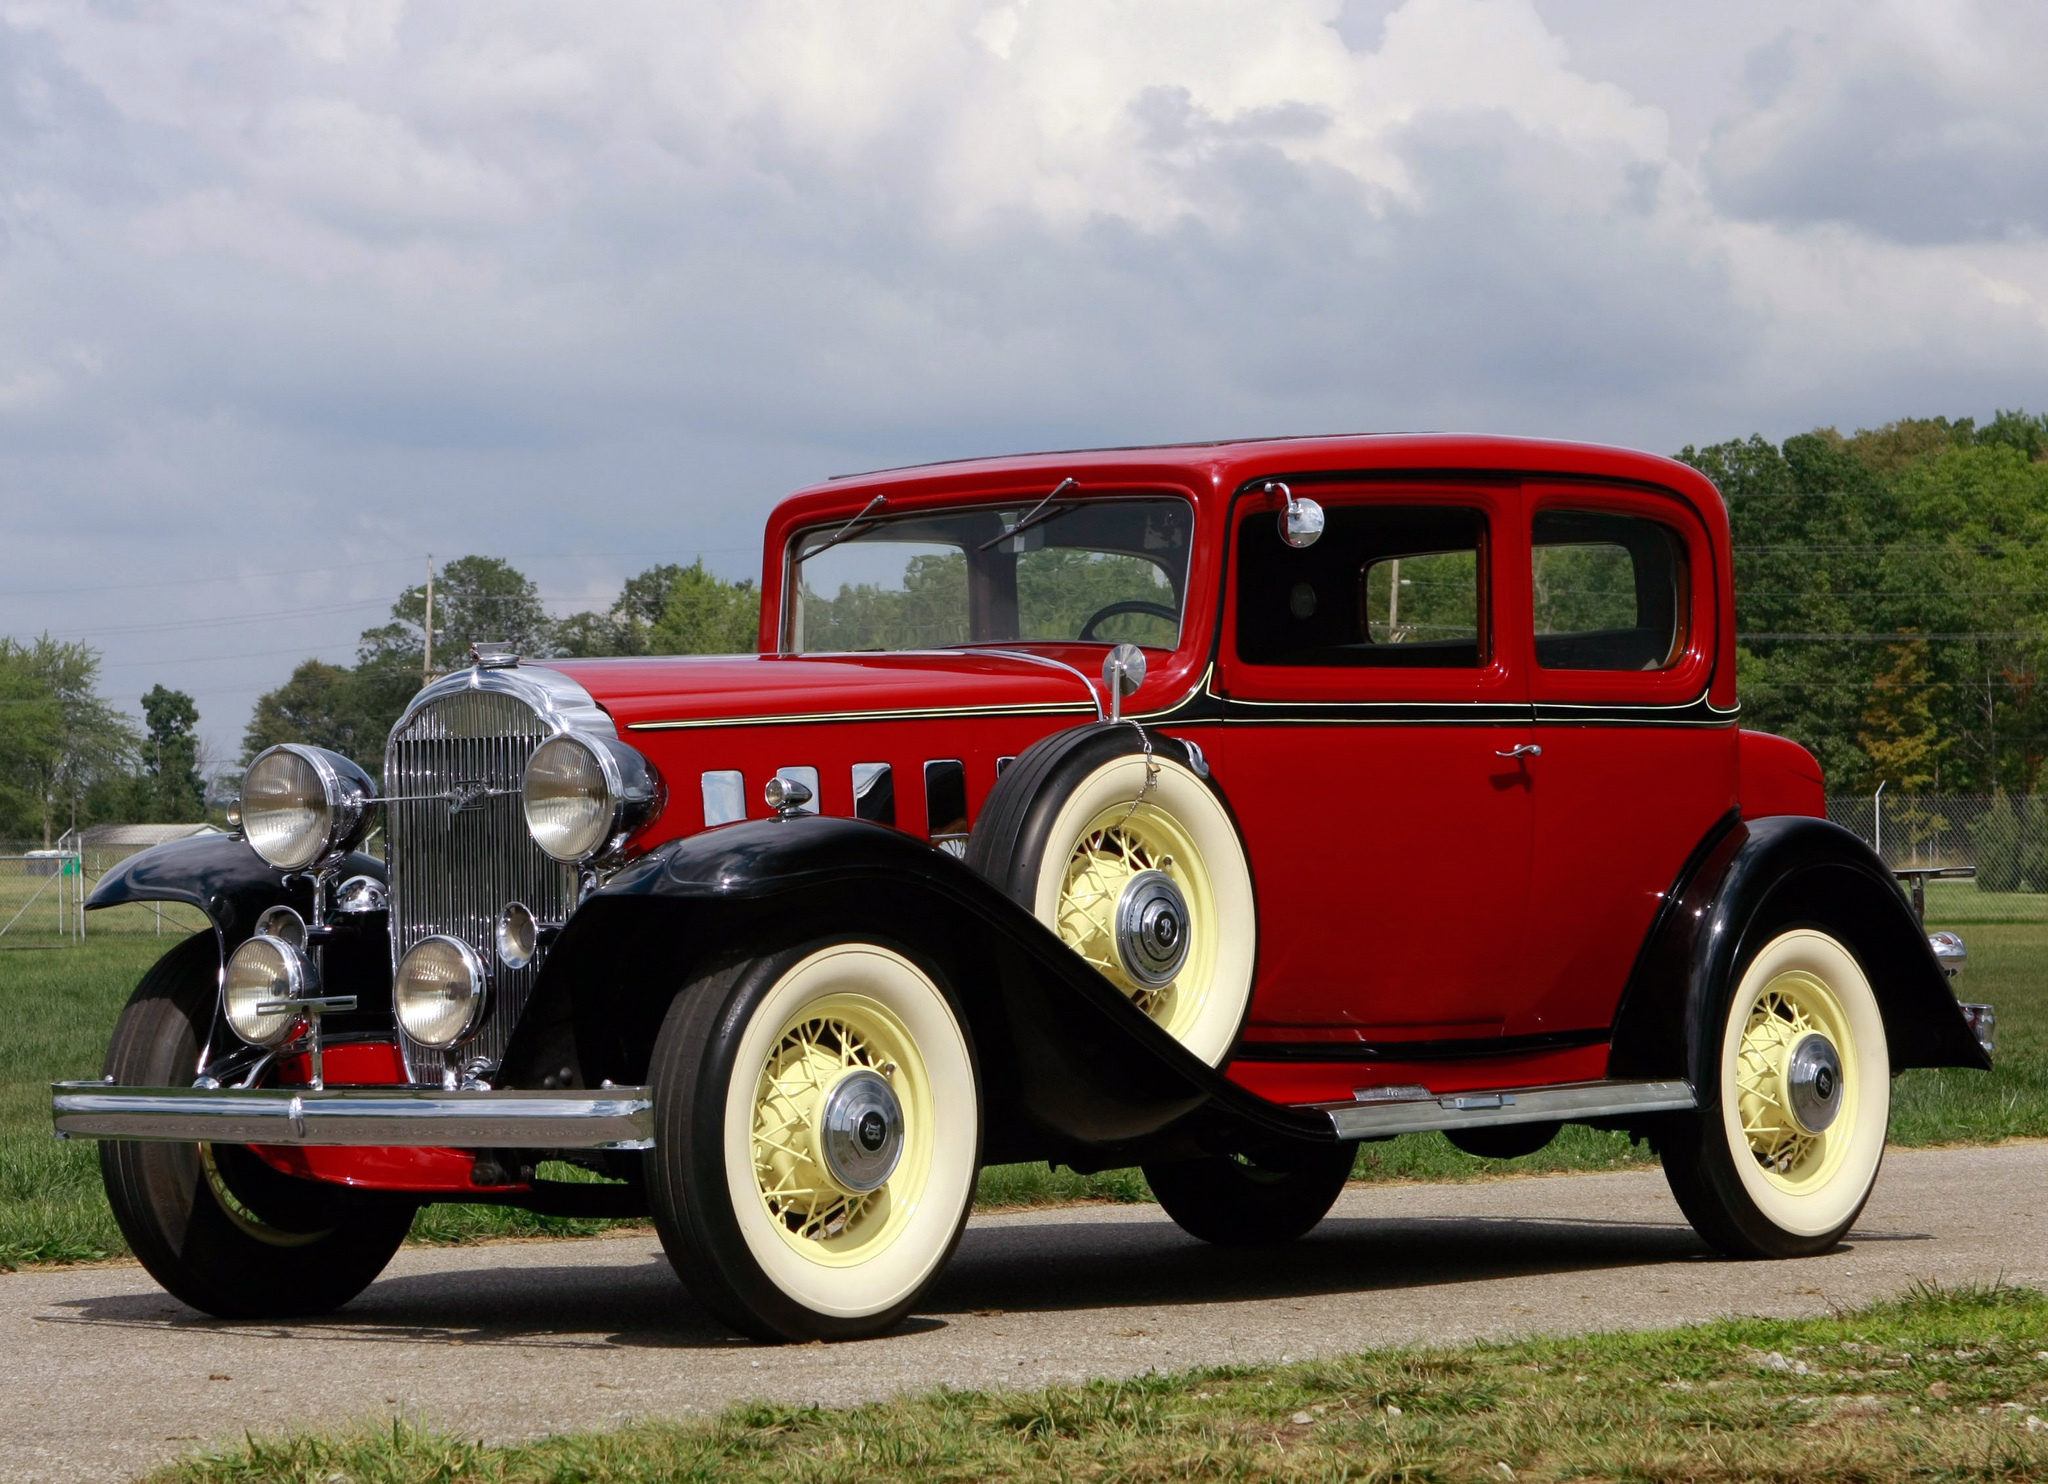 1932 Buick Series 80 Victoria Coupe